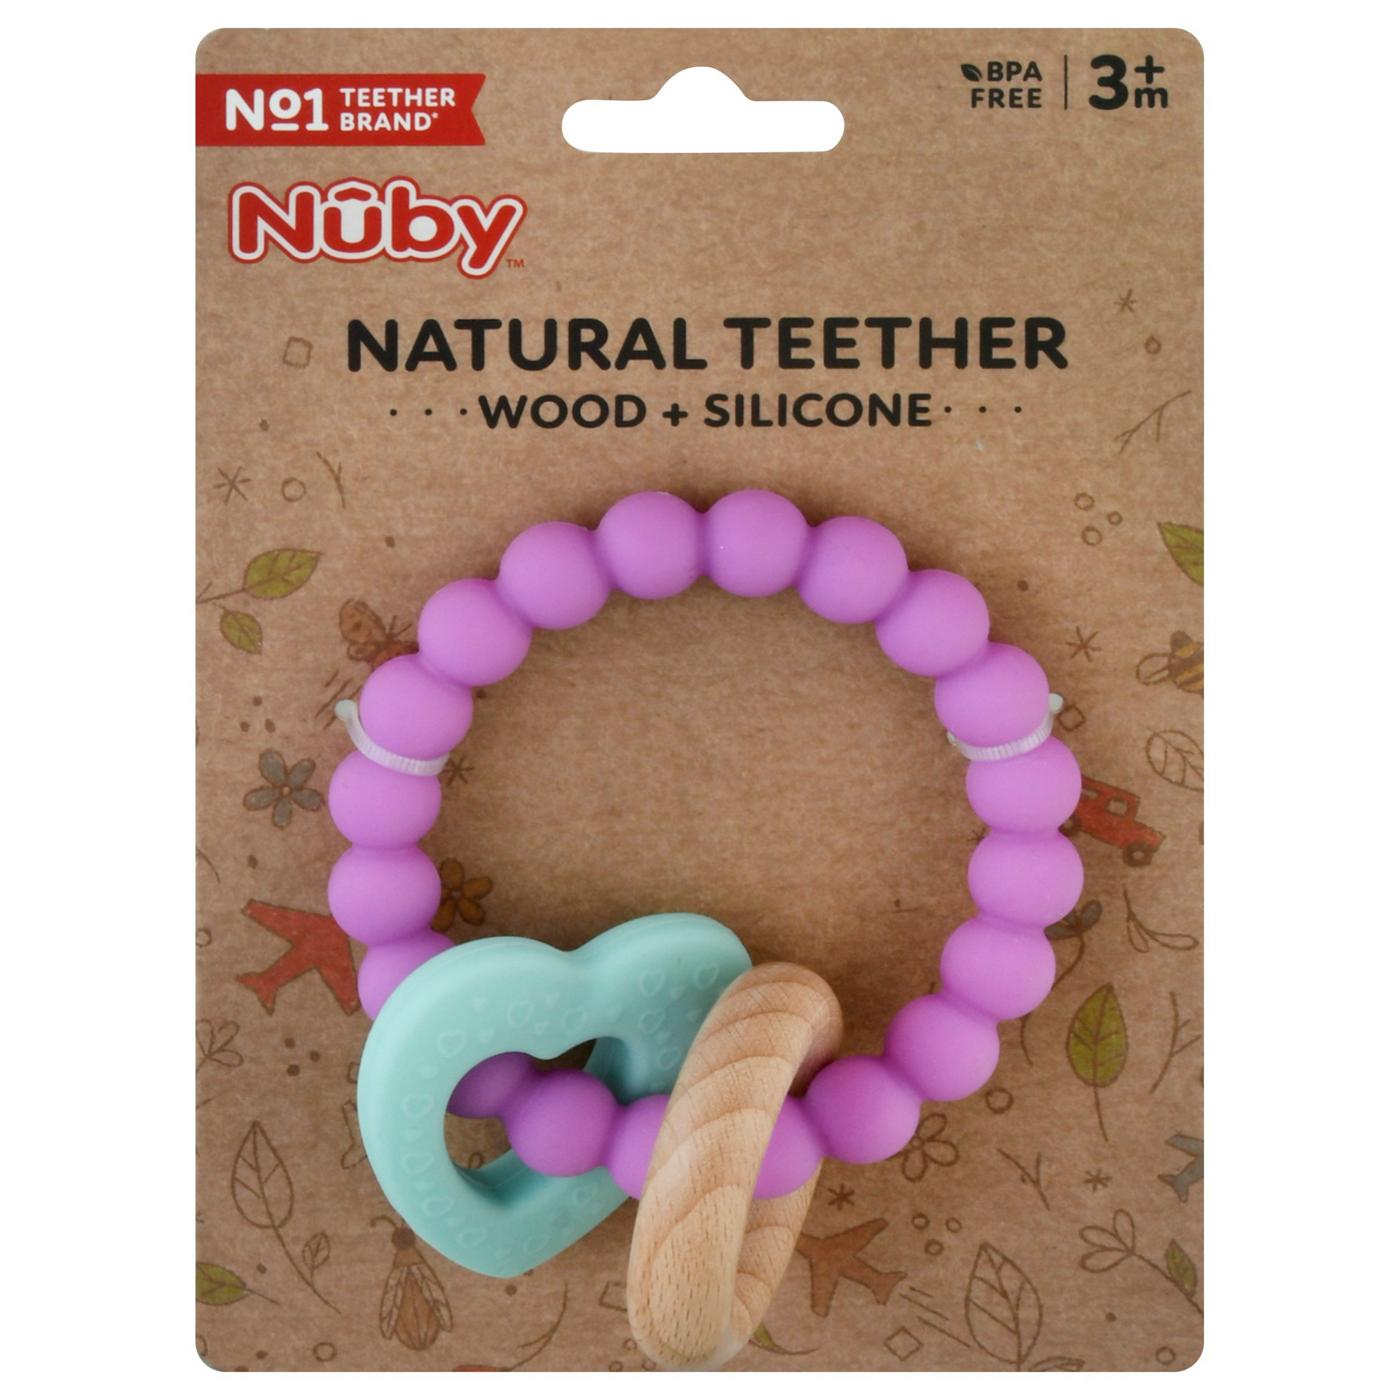 Nuby Natural Teether Wood + Silicone; image 1 of 2